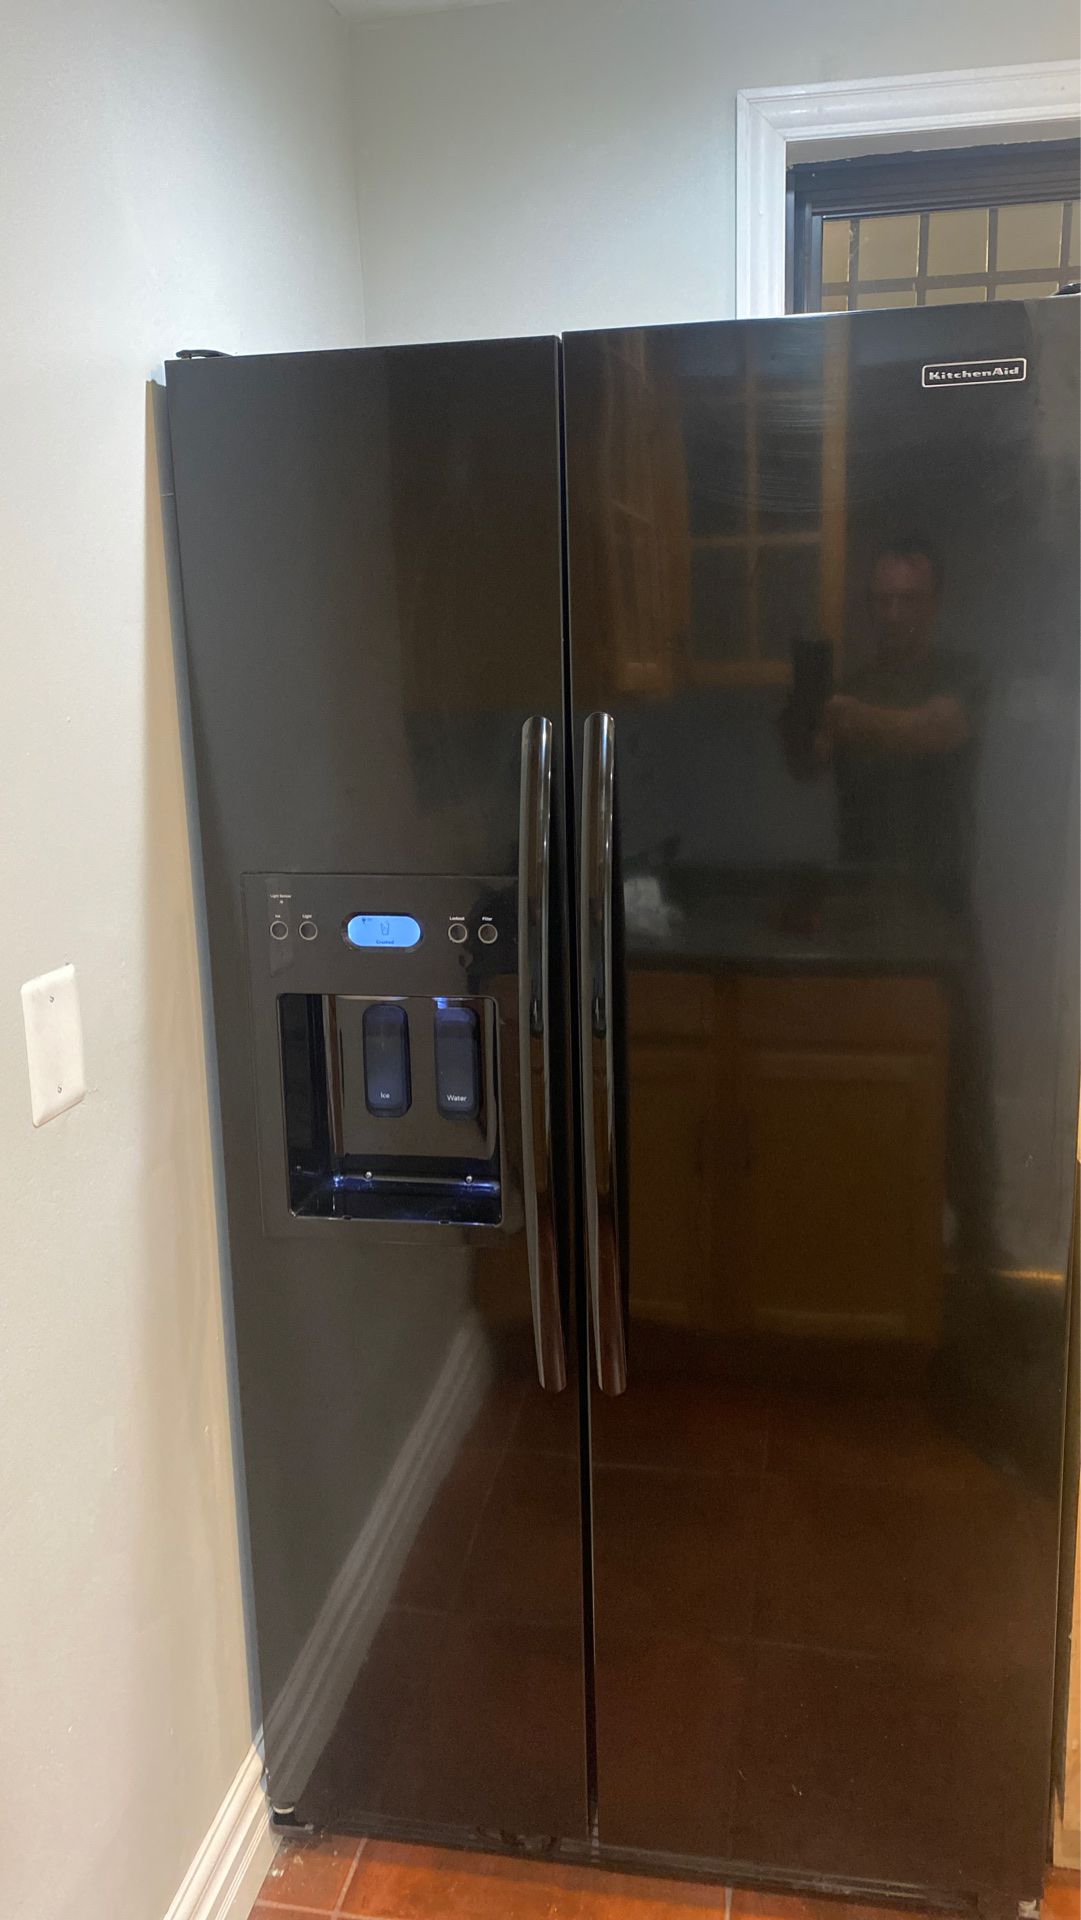 KitchenAid black refrigerator with ice and water dispenser